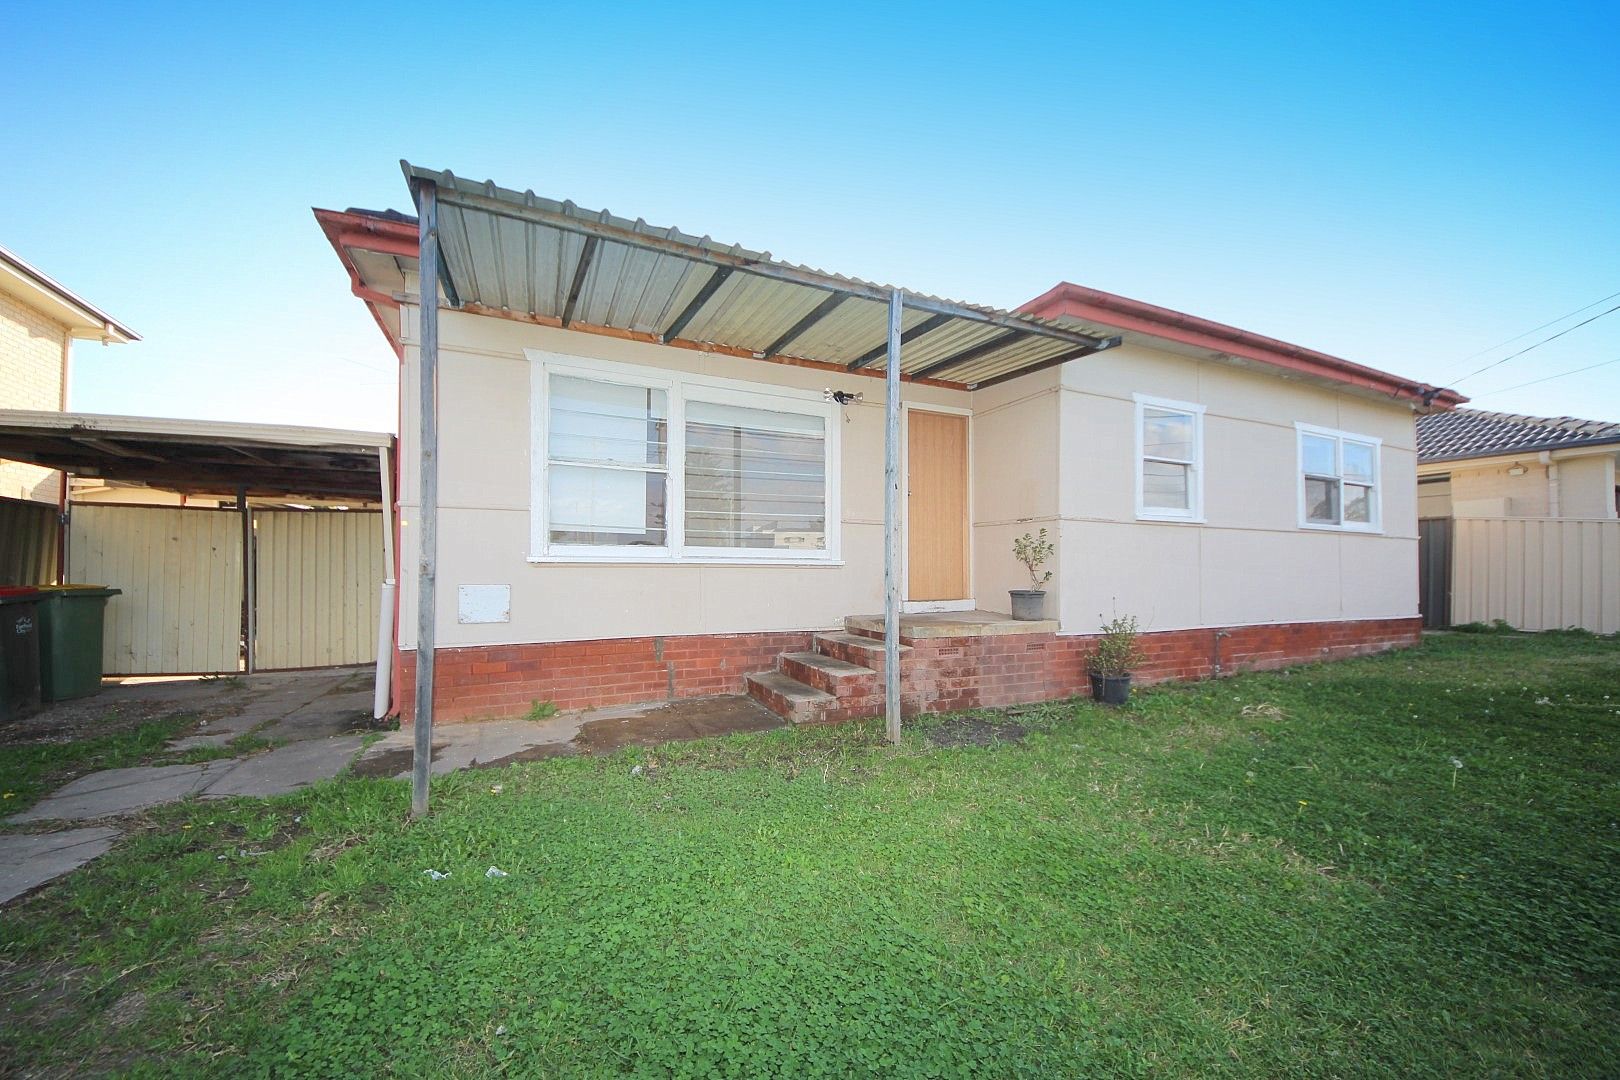 3 bedrooms House in 149 Maud Street FAIRFIELD WEST NSW, 2165